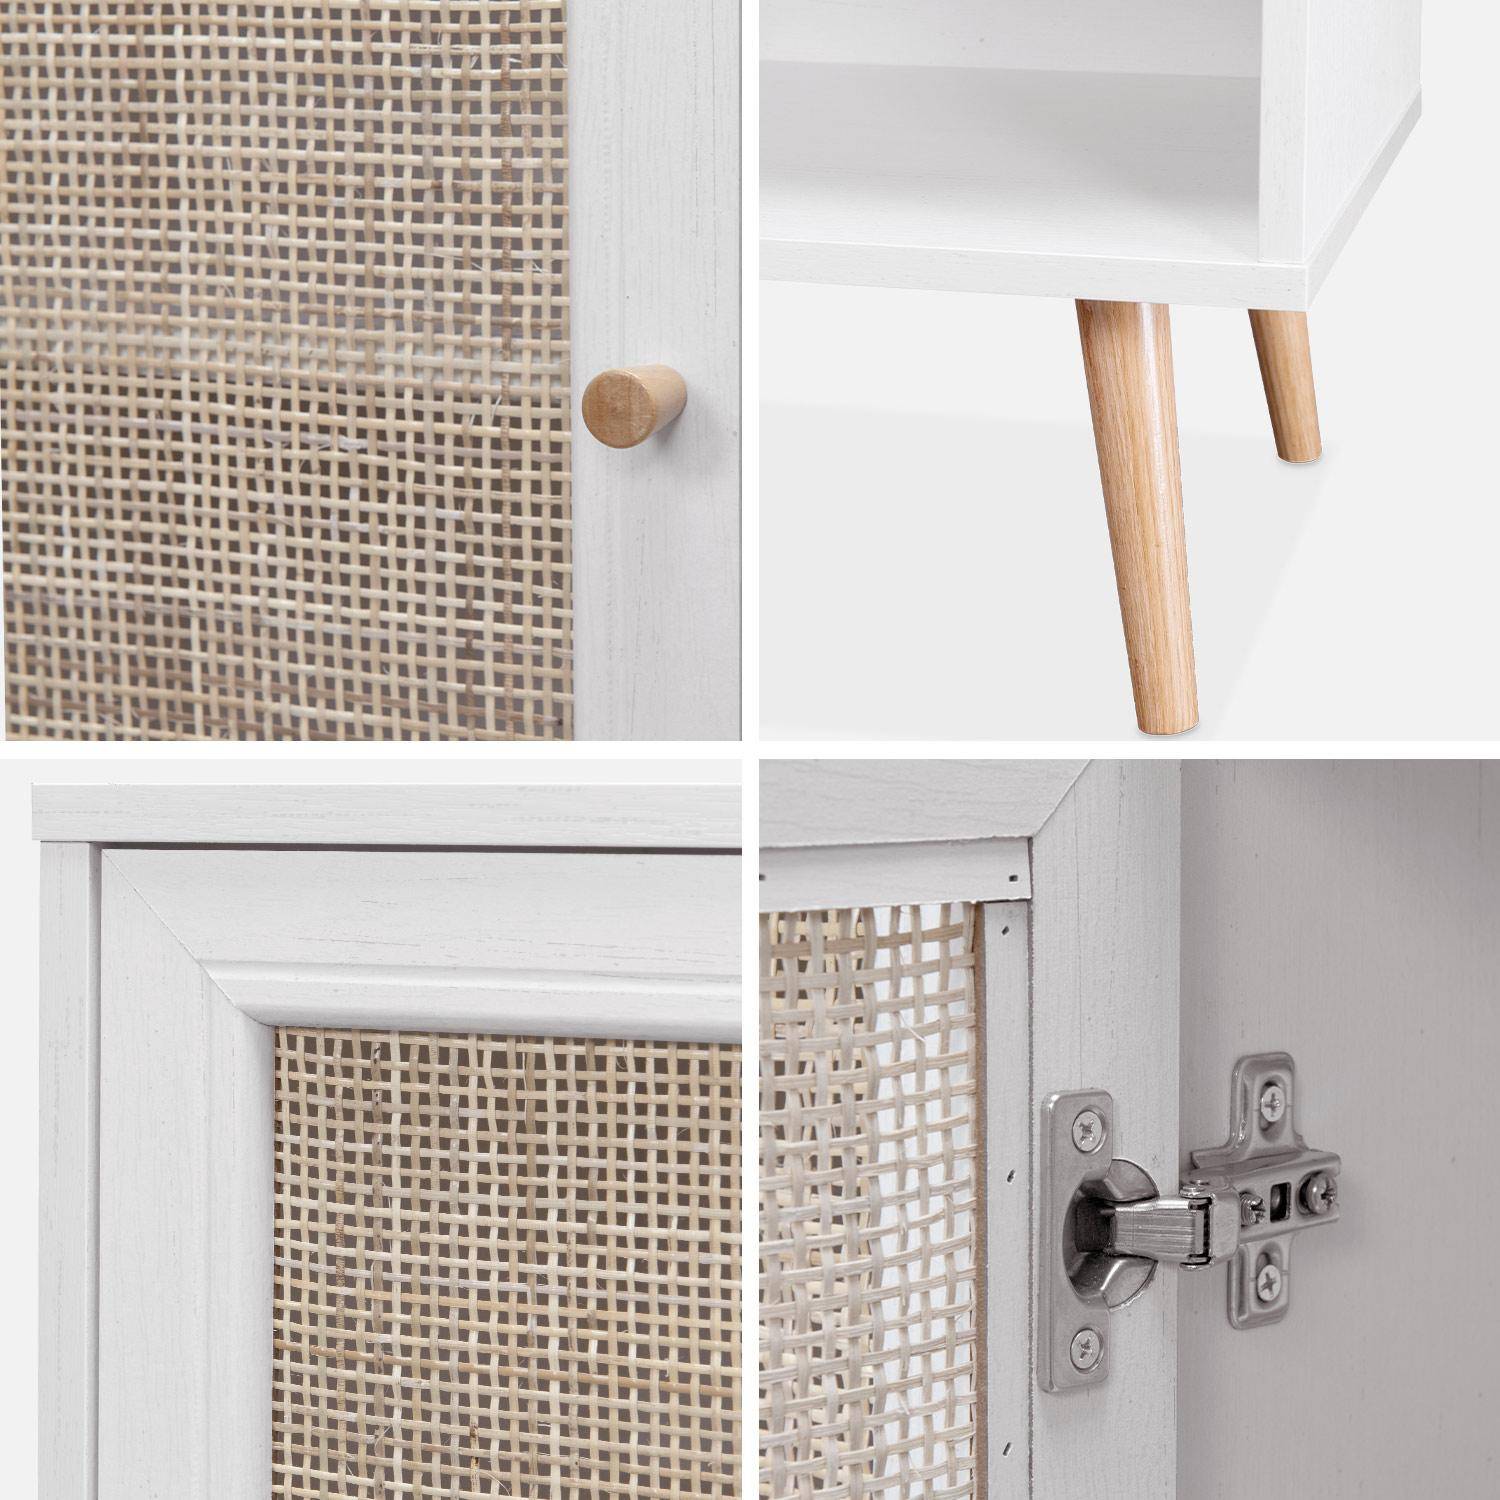 Wooden and cane rattan detail storage cabinet with 2 shelves, 1 cupboard, Scandi-style legs, 80x39x65.8cm - Boheme - White Photo5